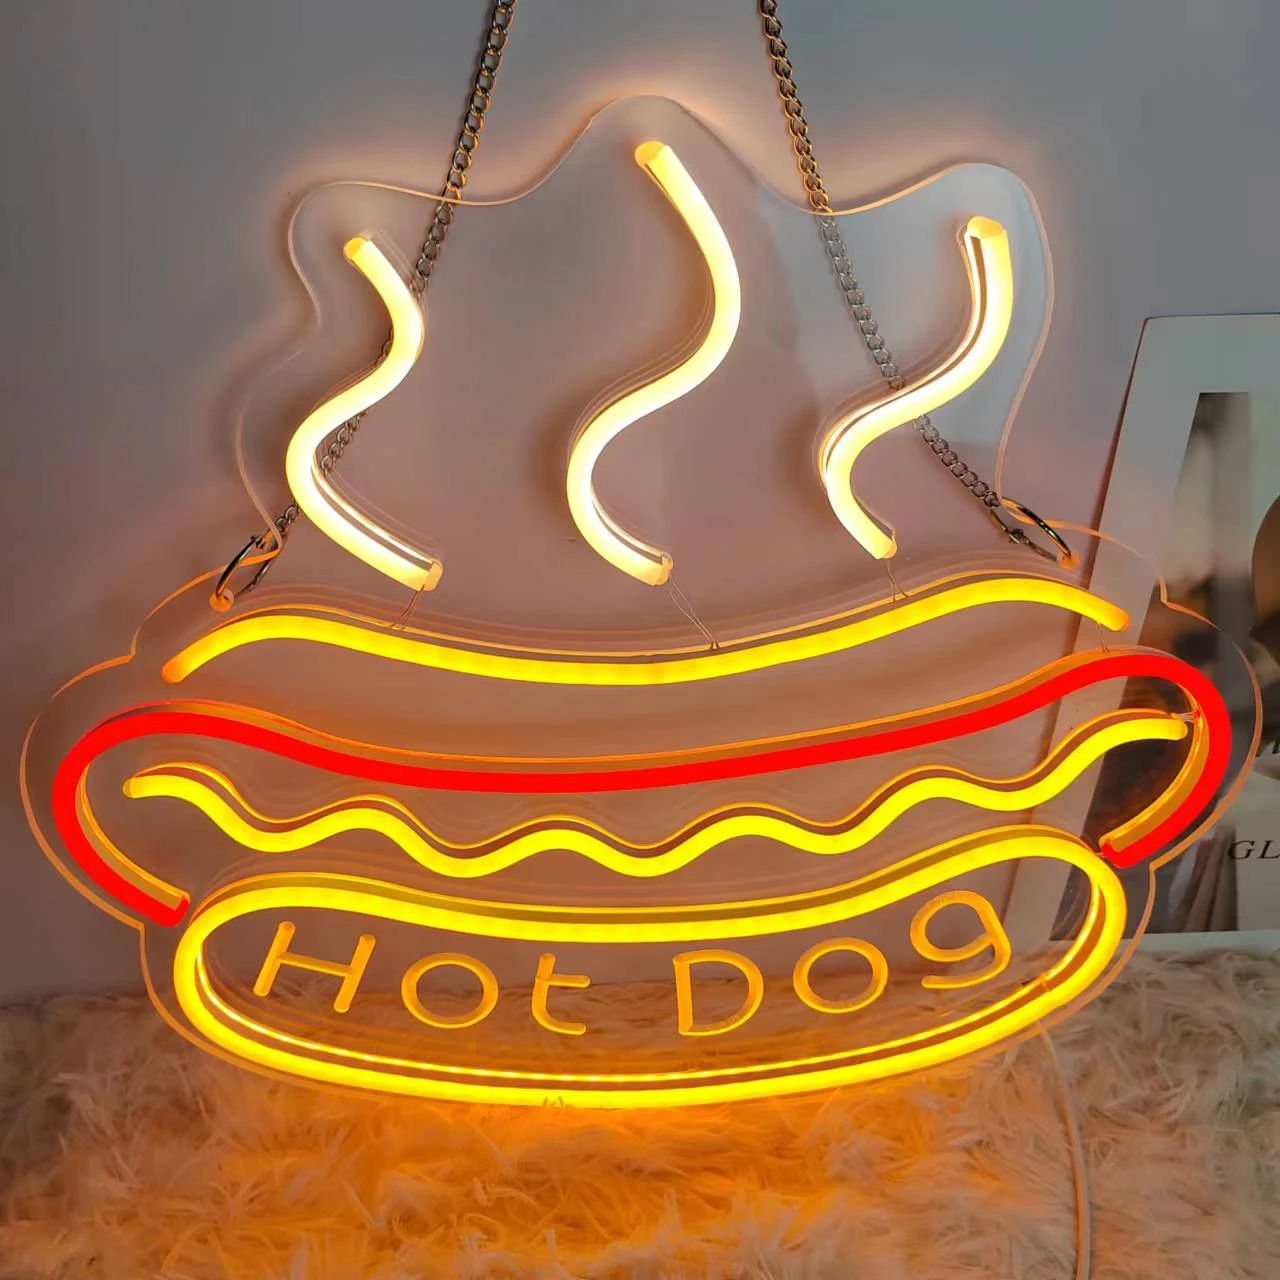 A neon sign with a food design